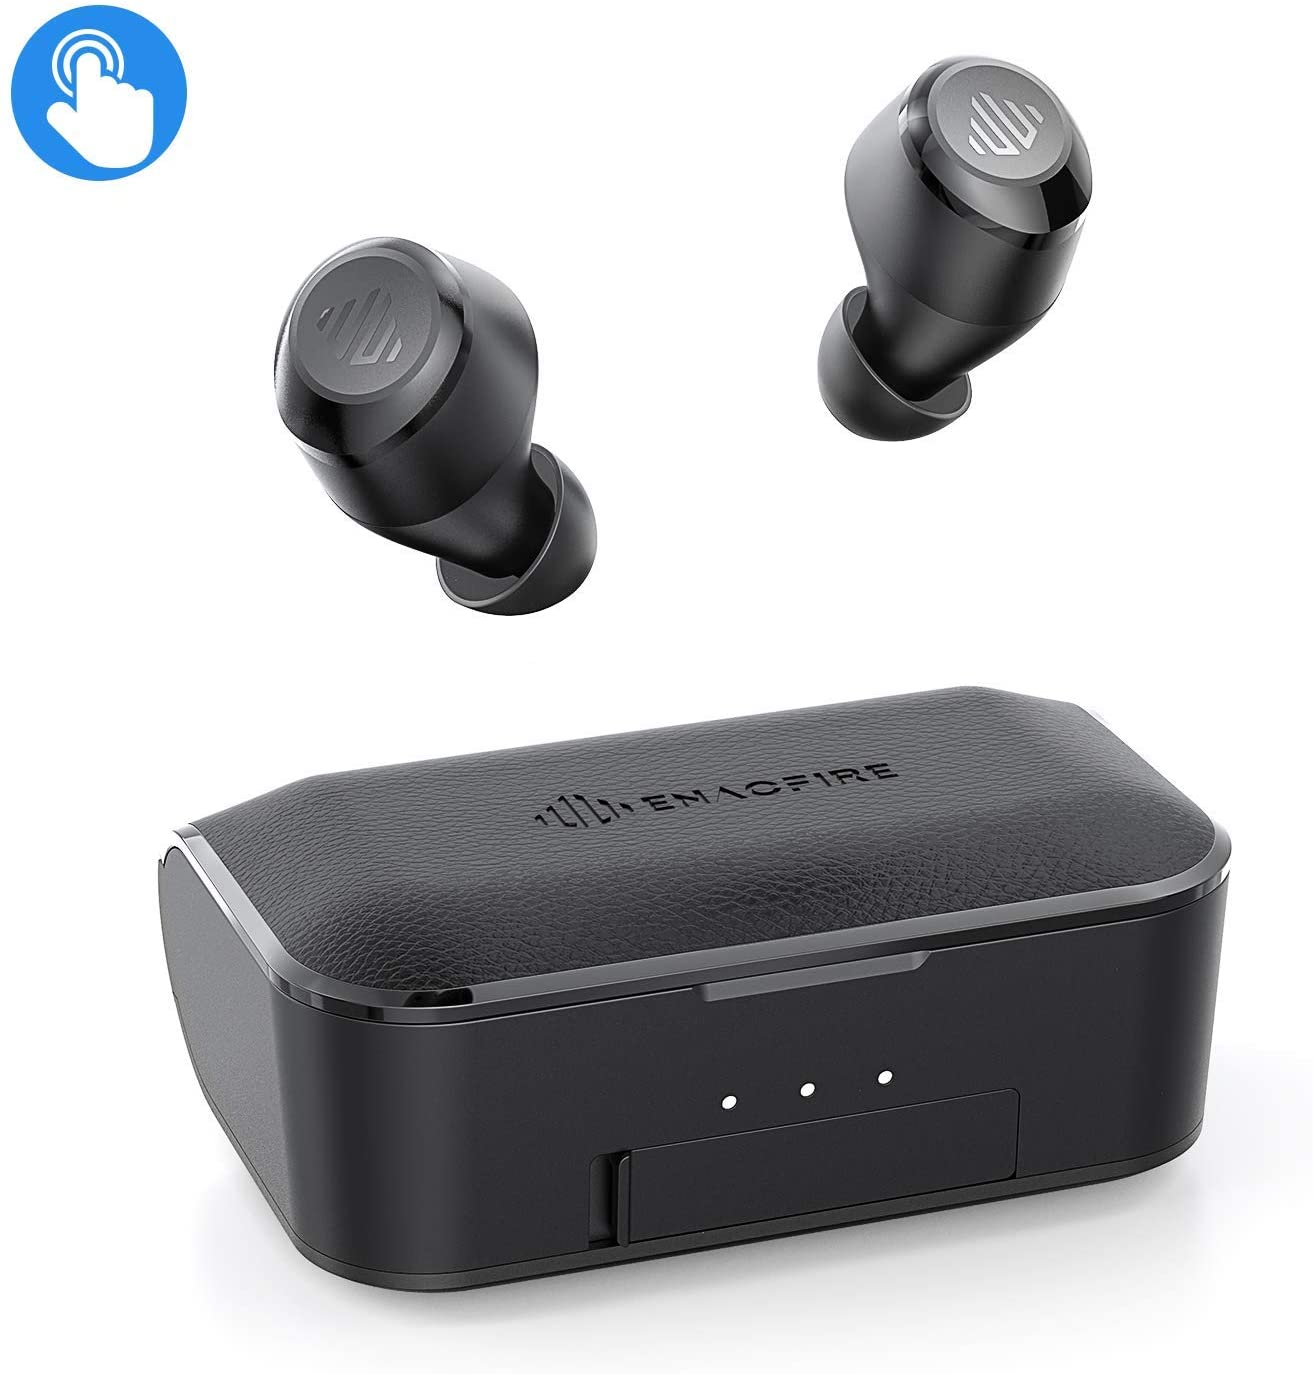 Remote Earphones, F1 Remote Headphones CVC 8.0 Commotion Crossing out AptX Sound system Sound Bluetooth Earphones 208H Cycle Recess Remote Earbuds Contact Control, IPX8 Waterproof